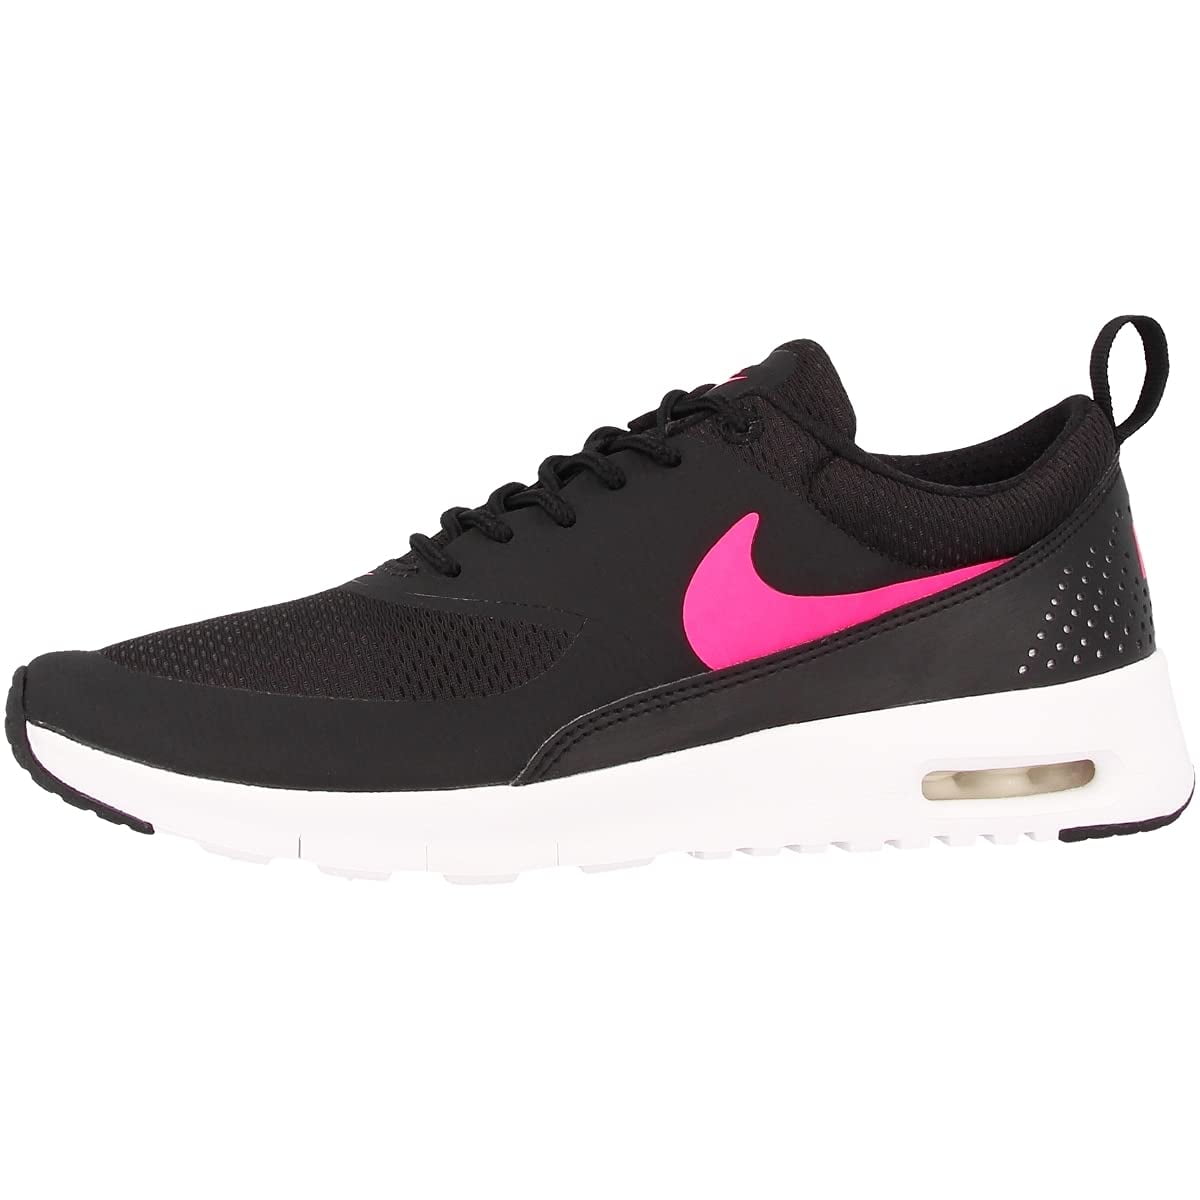 nike air max thea black and white size 7